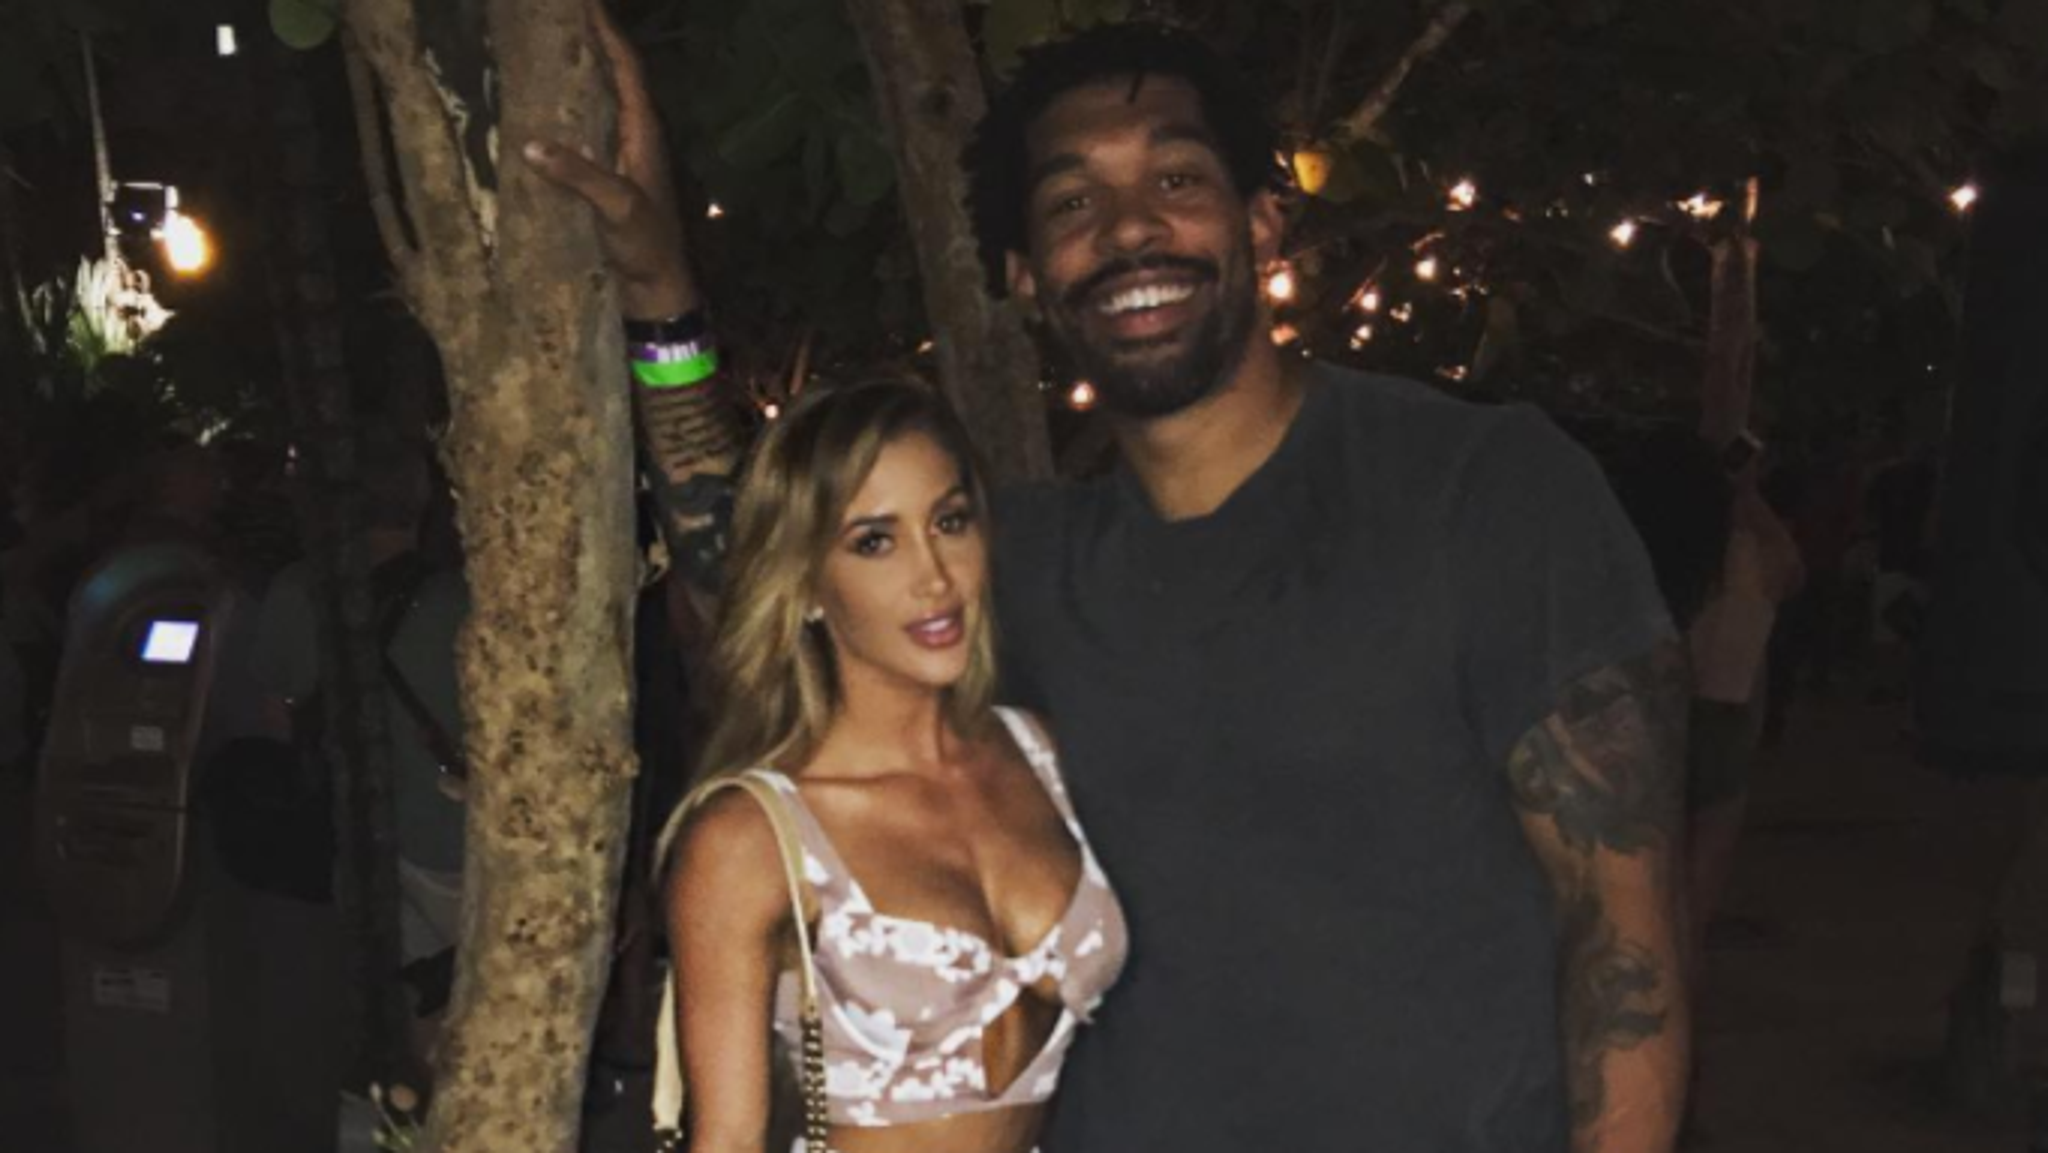 Julius peppers wife photos